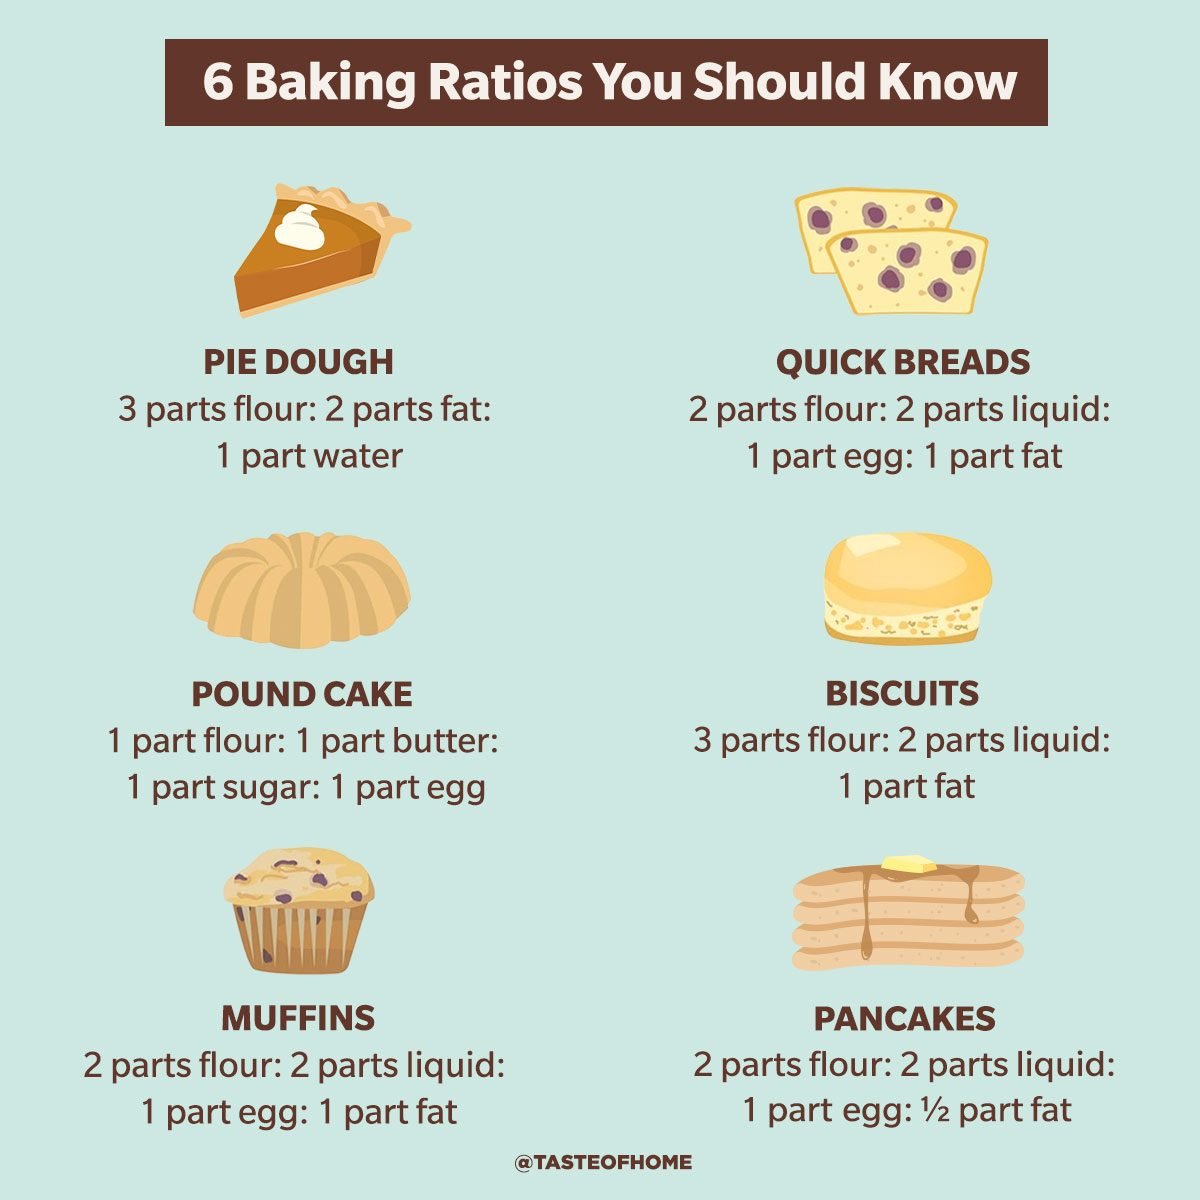 6 Essential Baking Ratios That You Should Know (With Chart!)